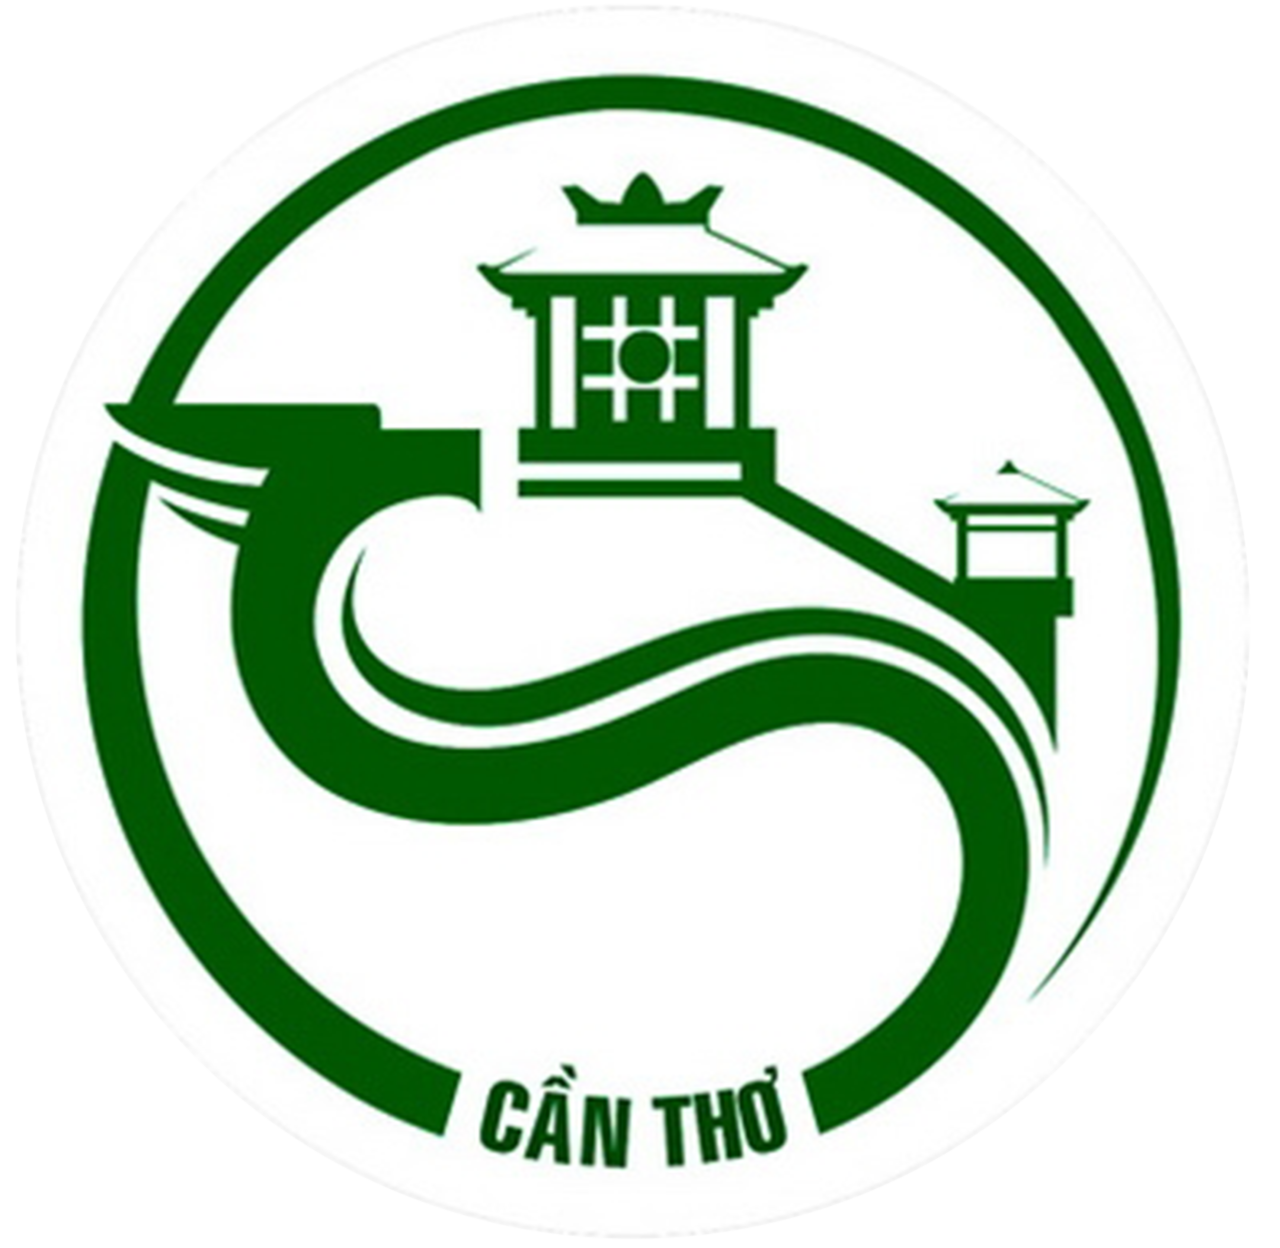 CanThoCity logo.png